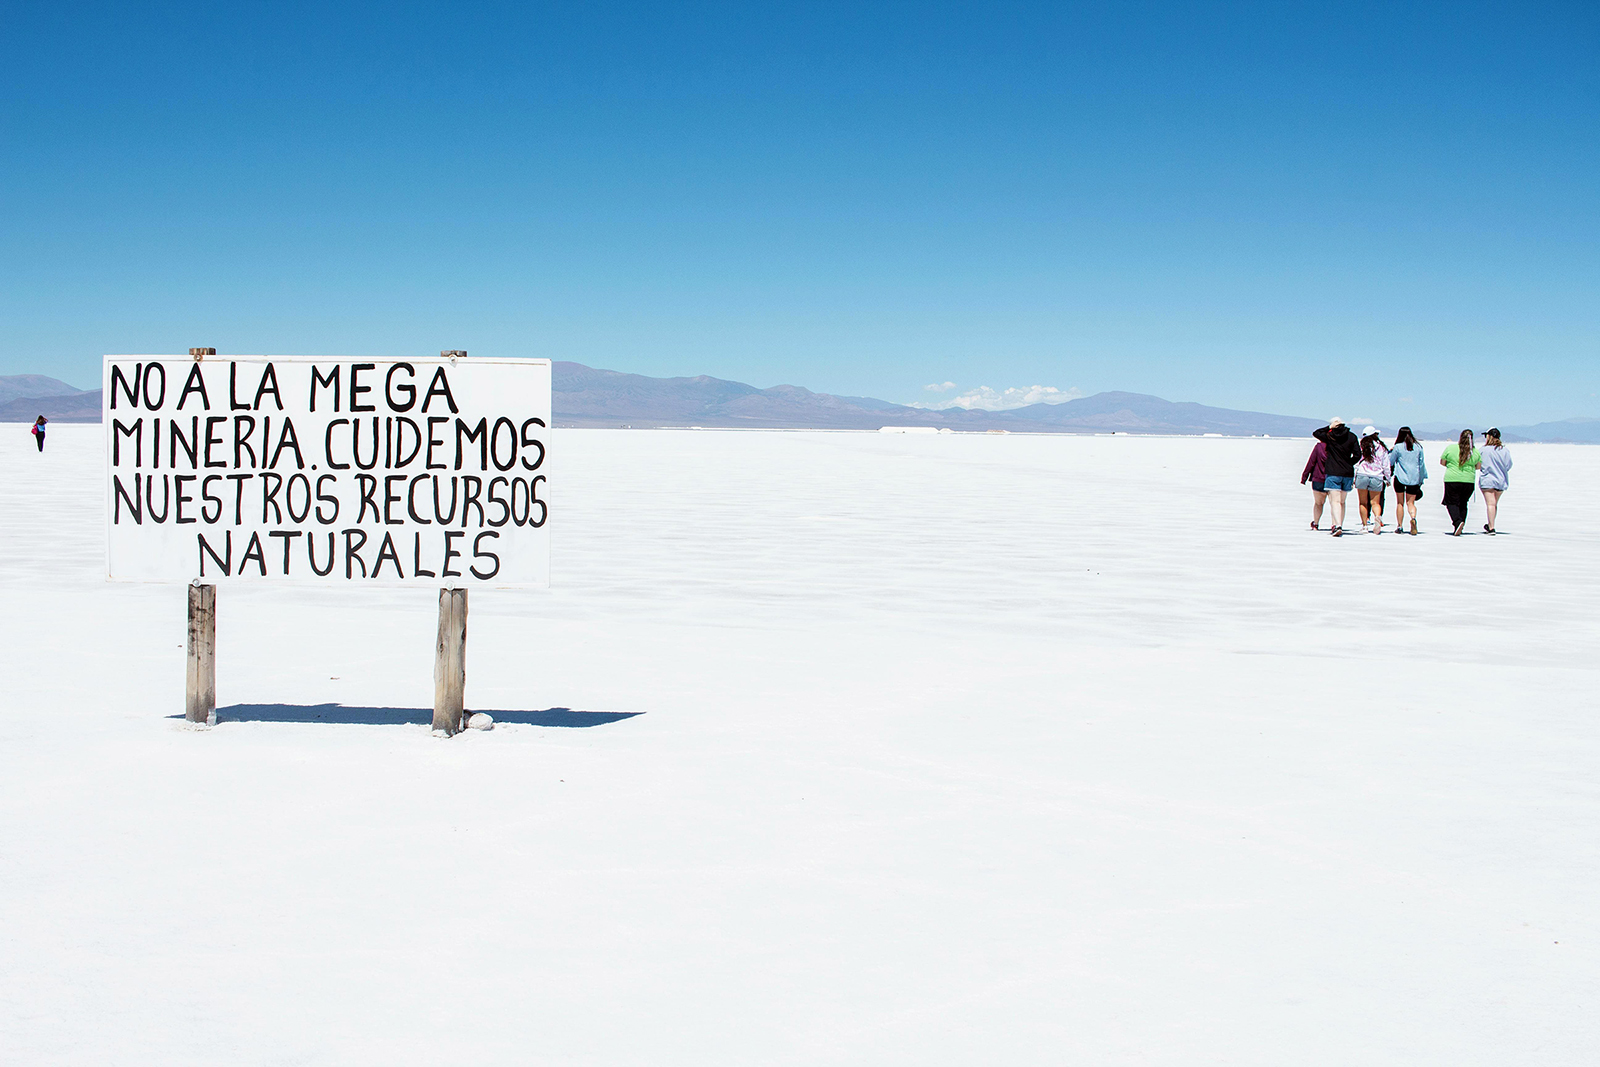 Tourists visit Salinas Grandes salt flats in Jujuy province, Argentina. A sign in Spanish reads "No to mega mining. Let's take care of our natural resources." (Photo by Maggy Idrobo López/Pexels/Creative Commons)